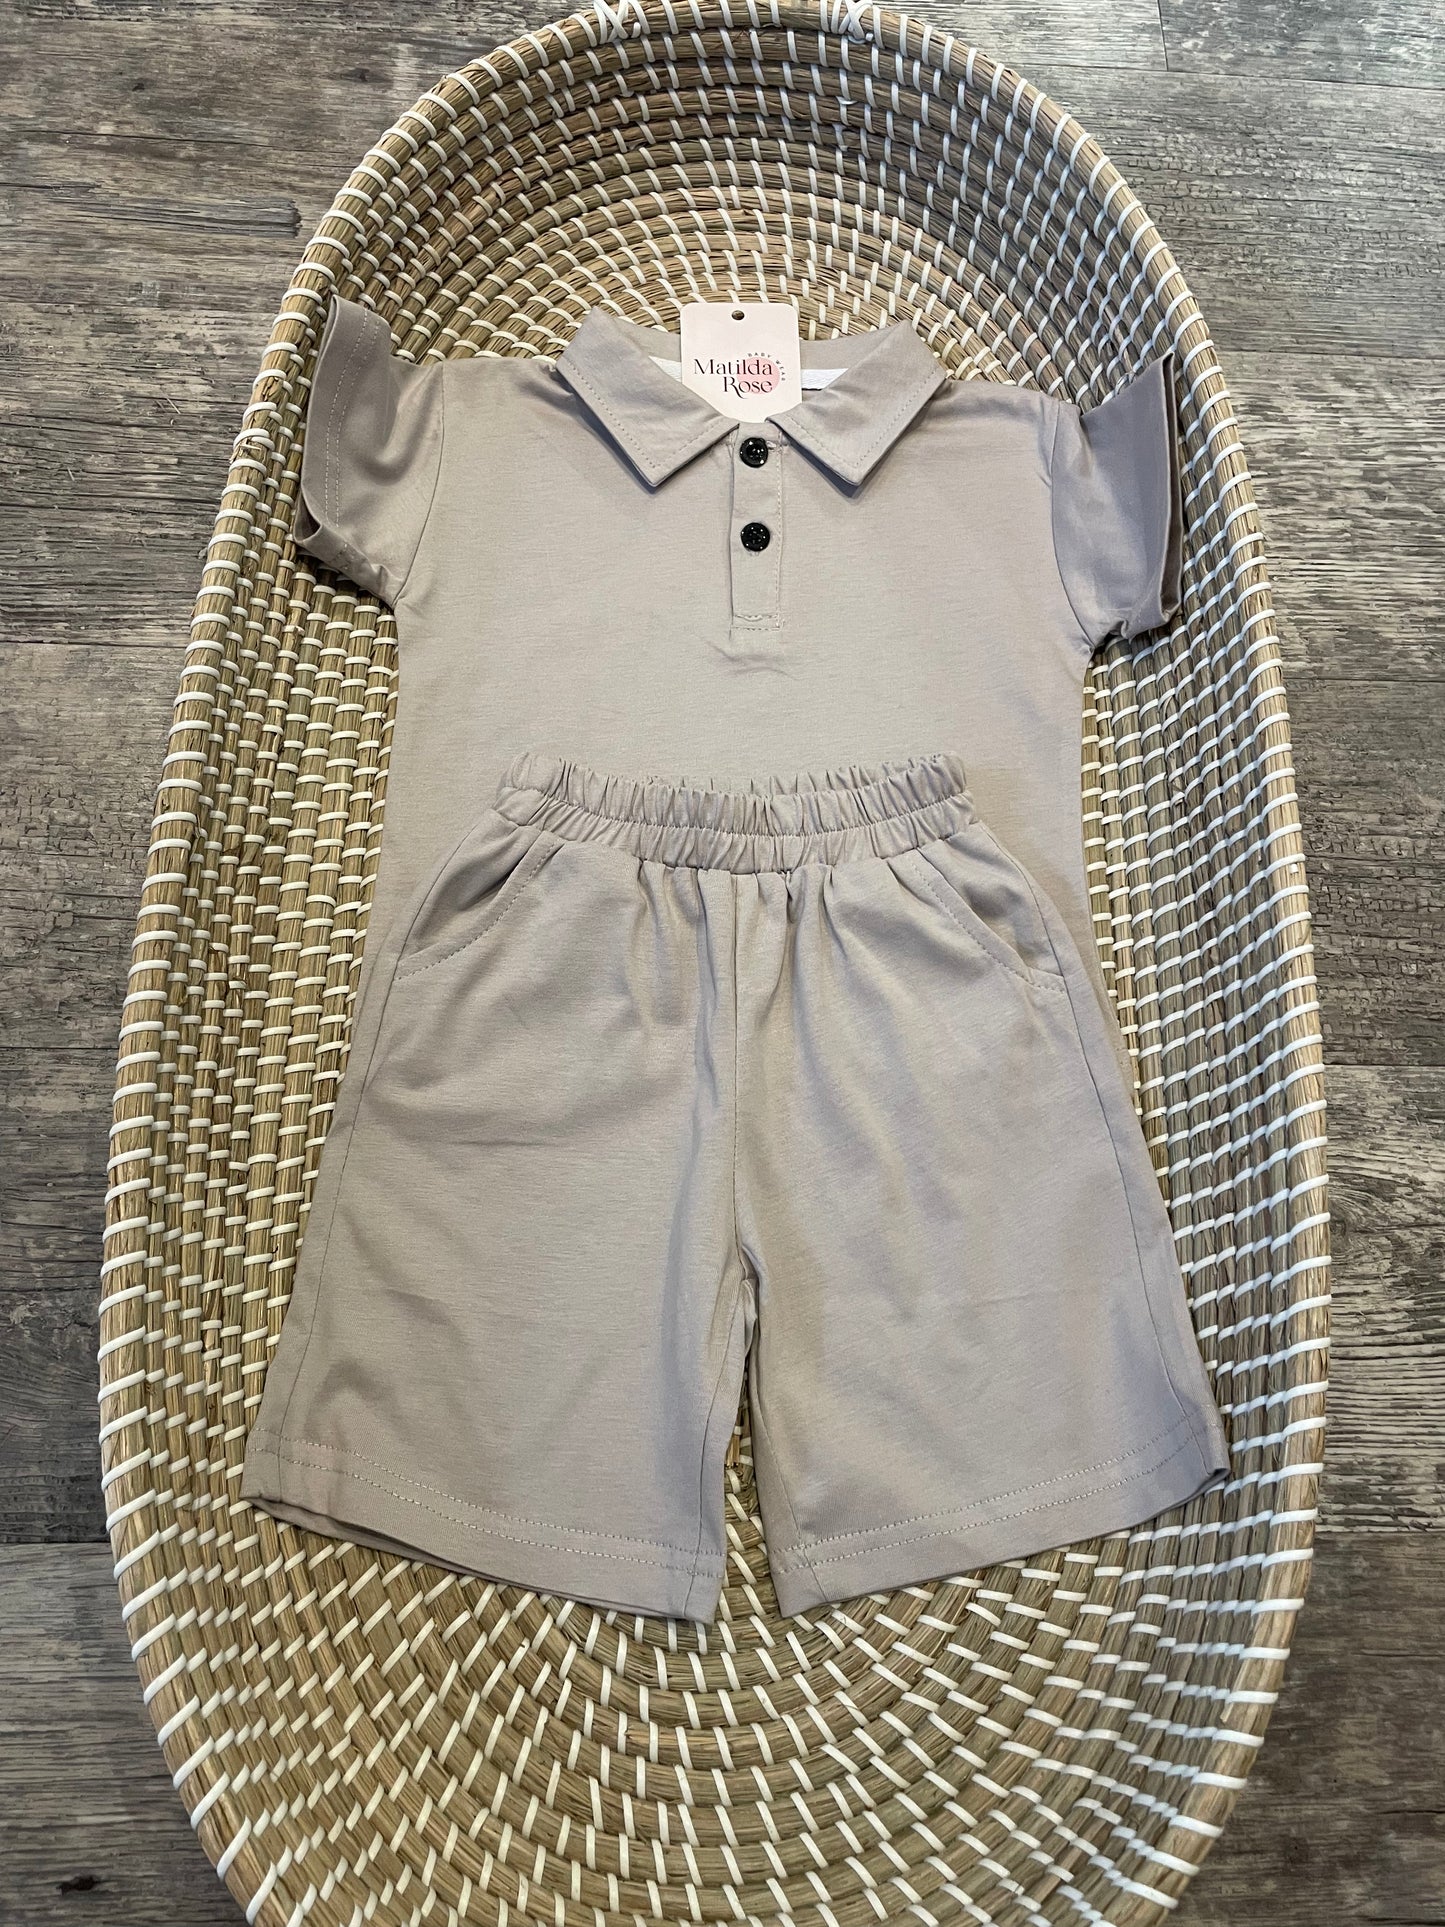 The personalised grey polo set